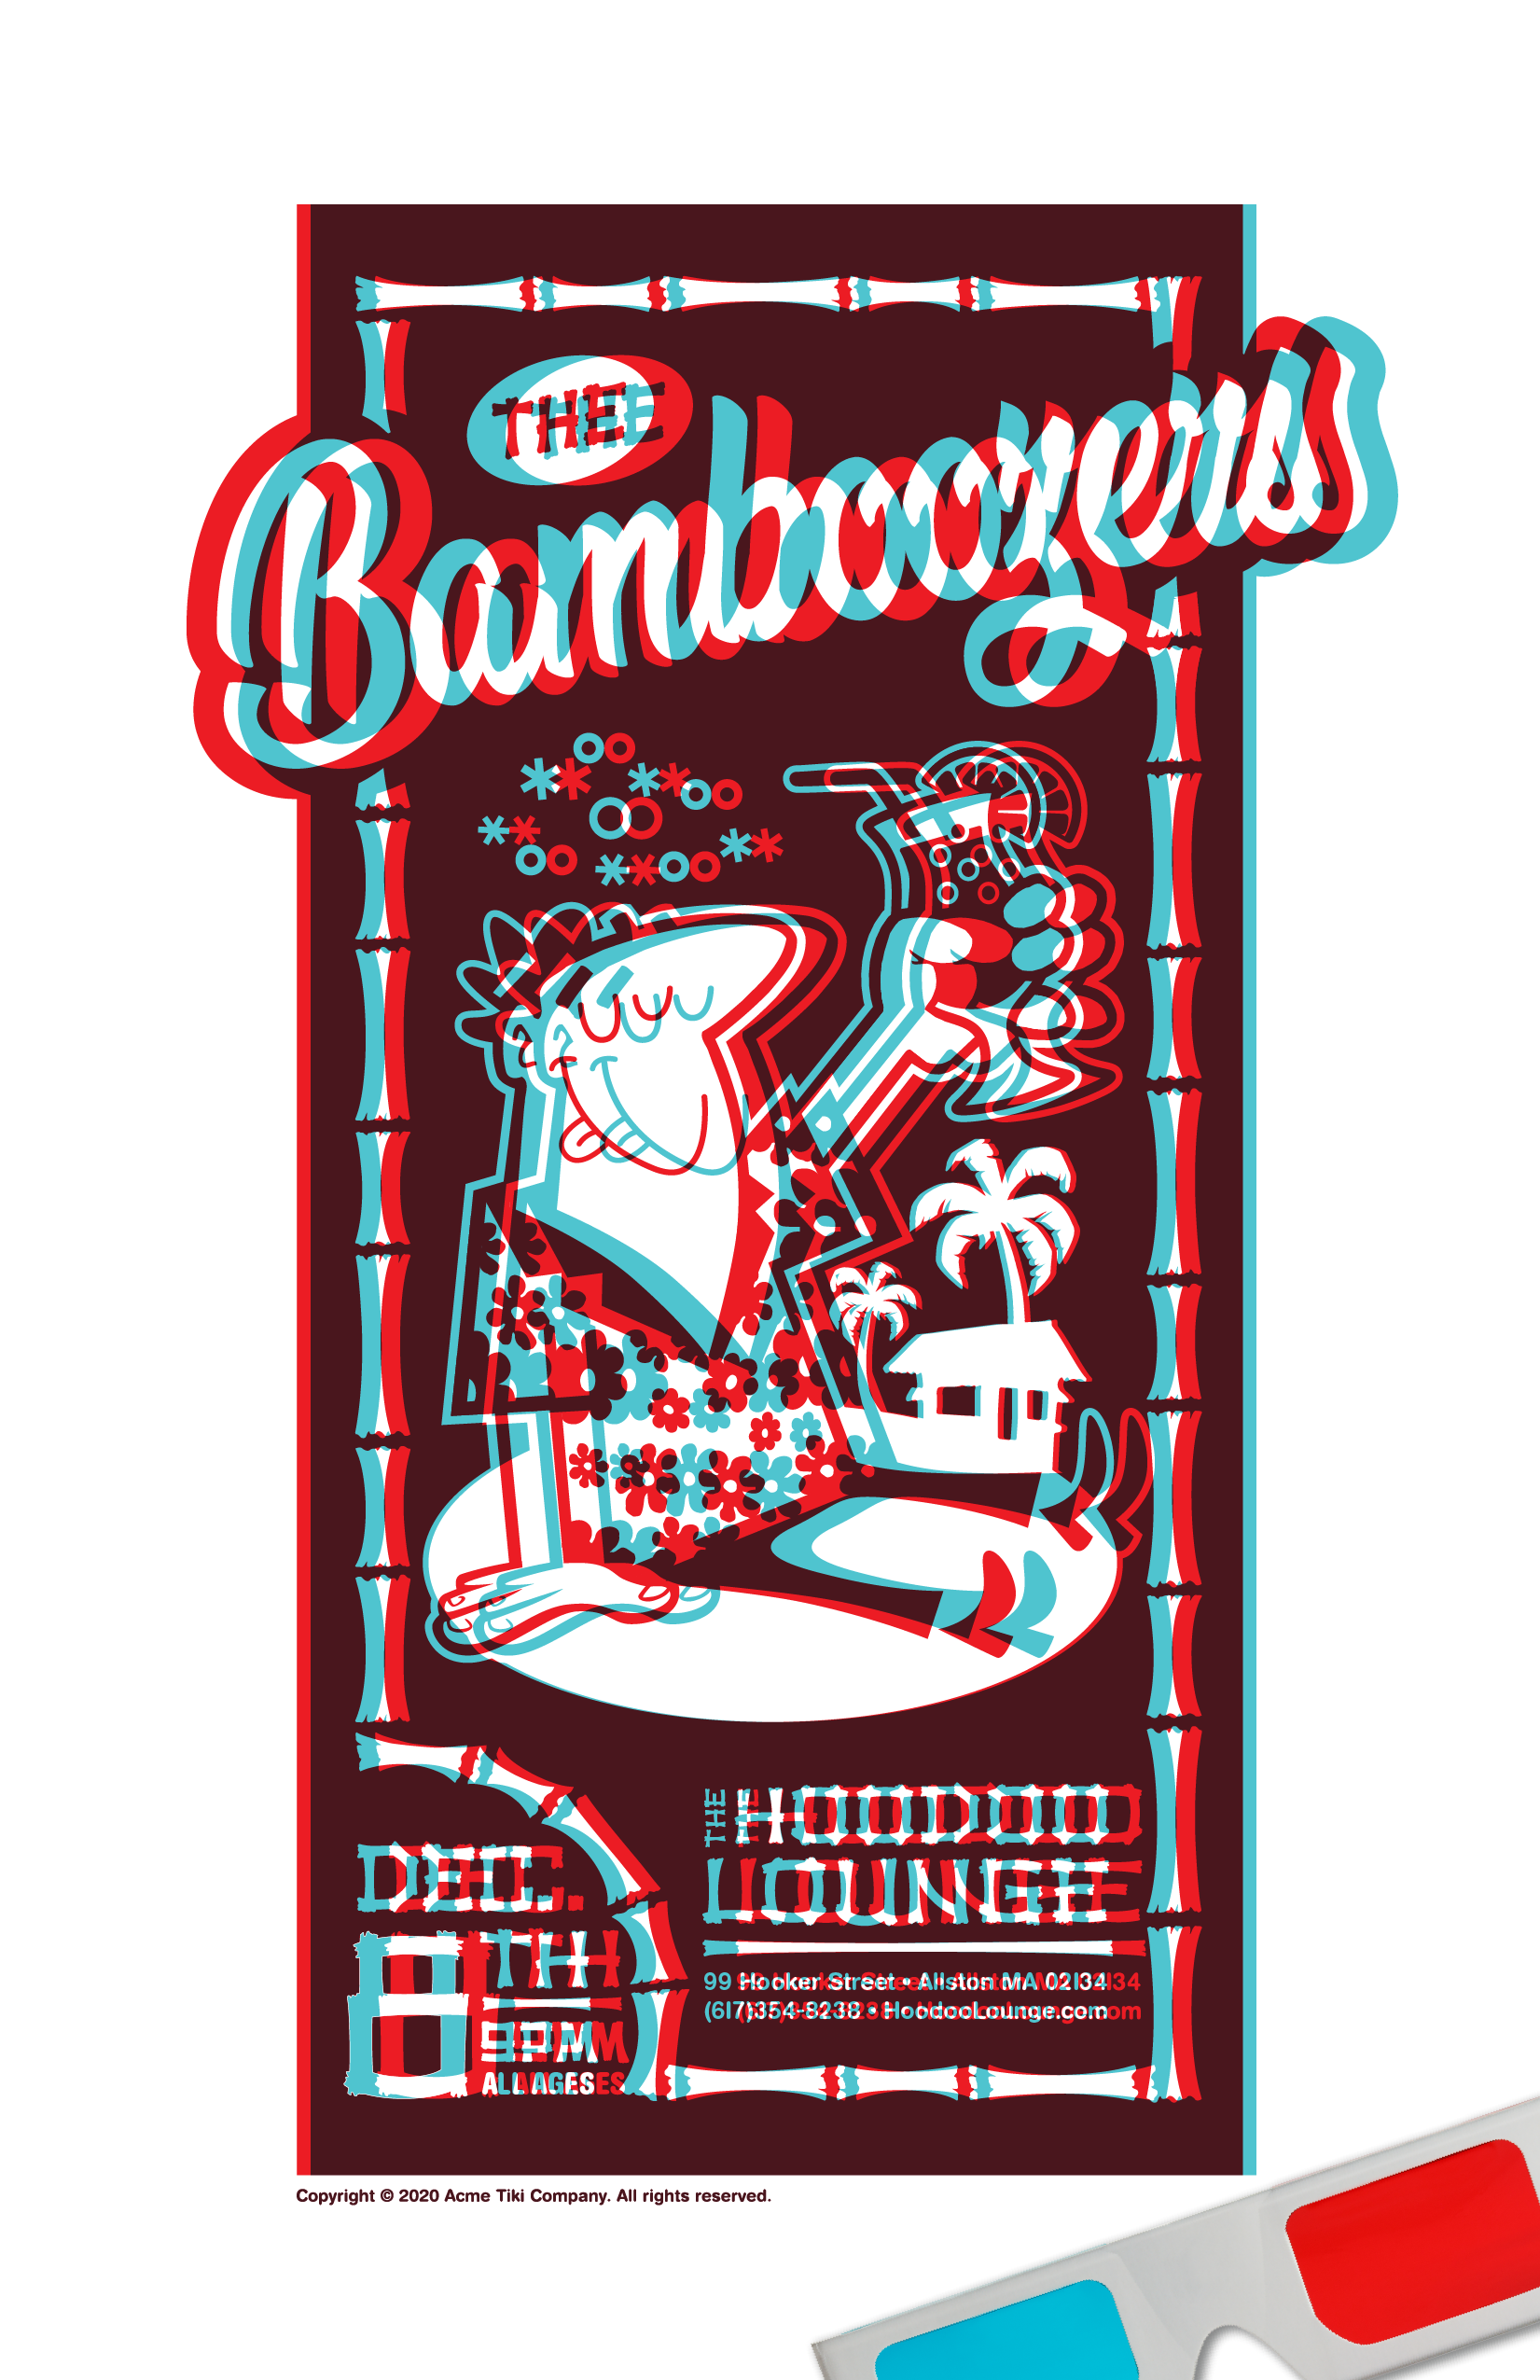 The Bamboozers Gig 3D Poster